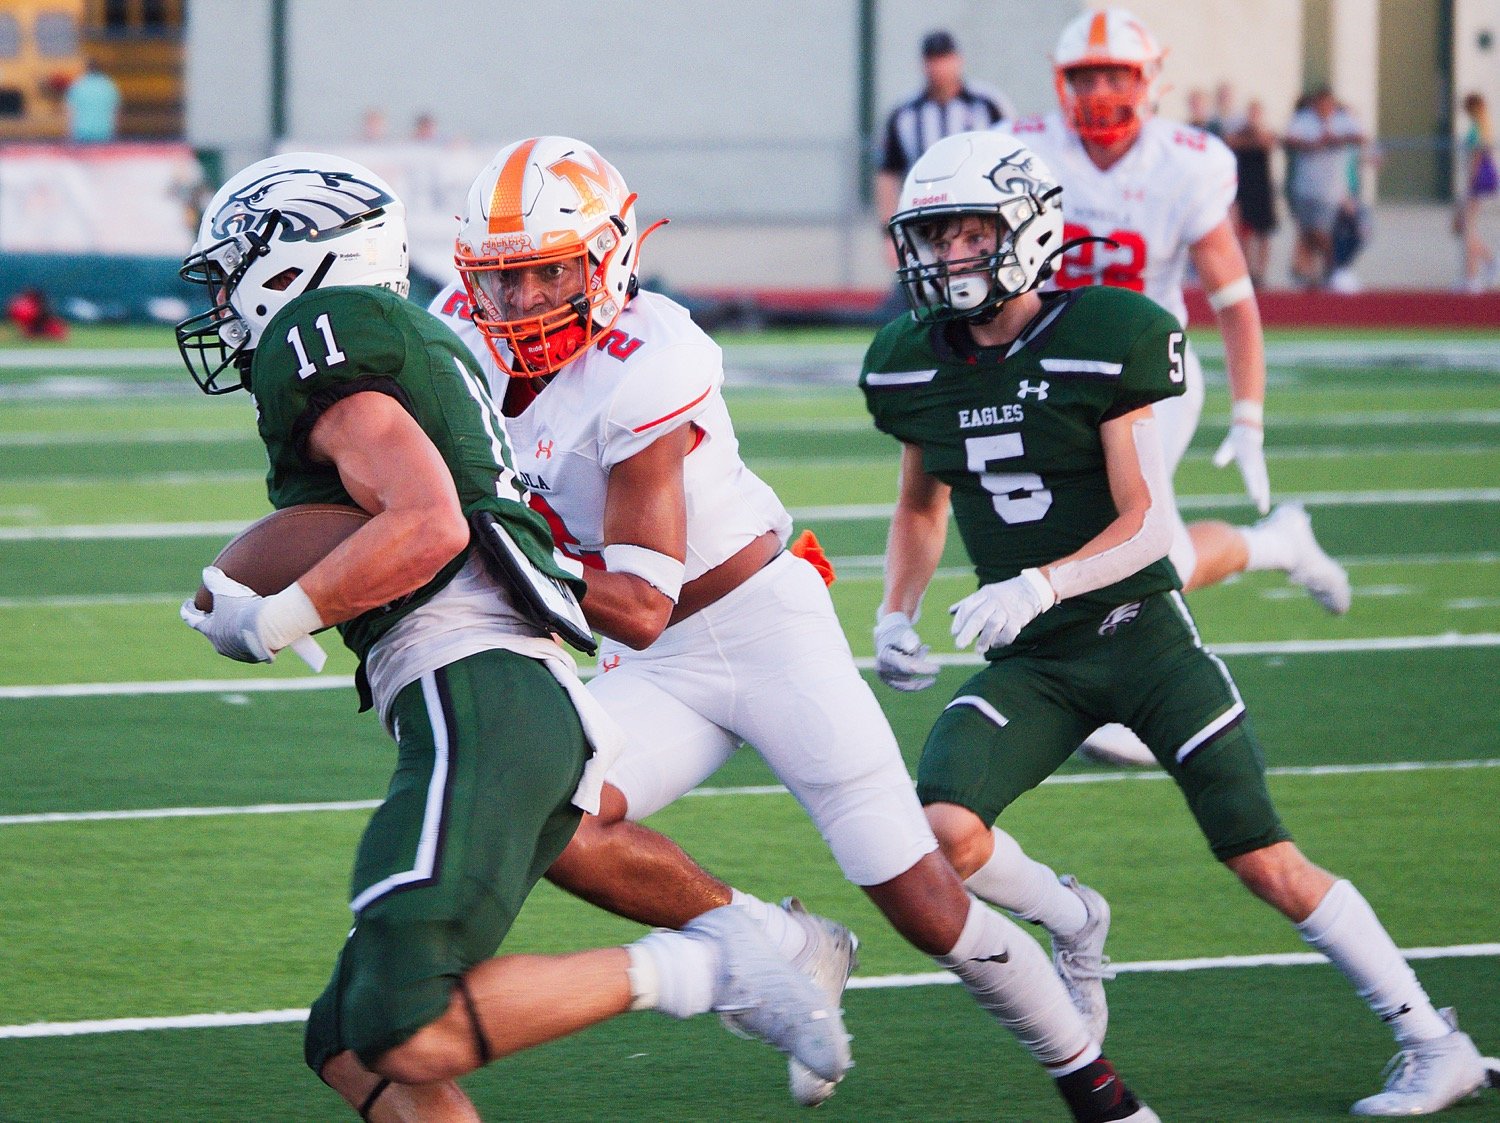 Mineola’s Jaxon Holland (2) pursues the Canton runner in Friday’s season opener, won 24-21 by the host Eagles. [more photos from Canton]